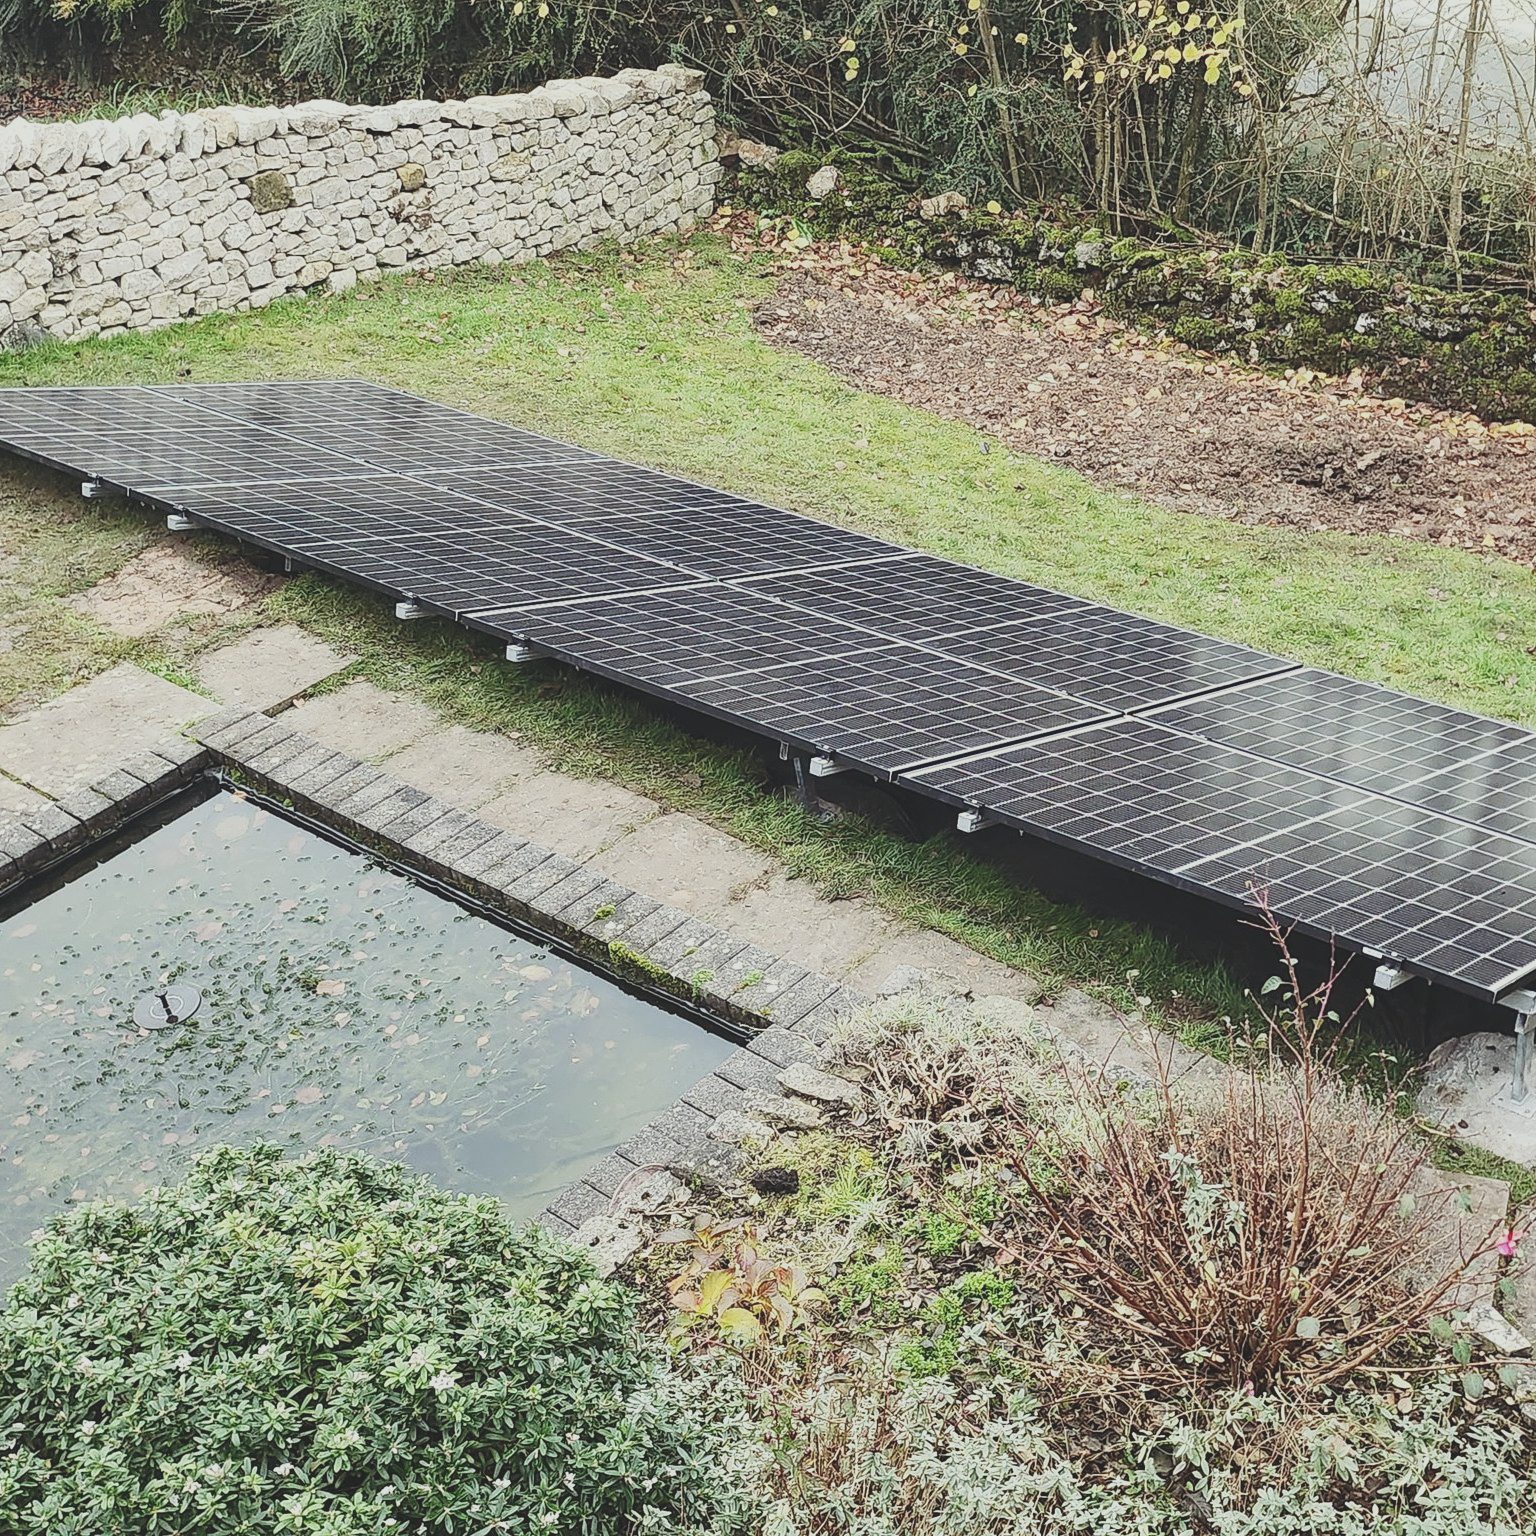 Solar panels mount to the ground